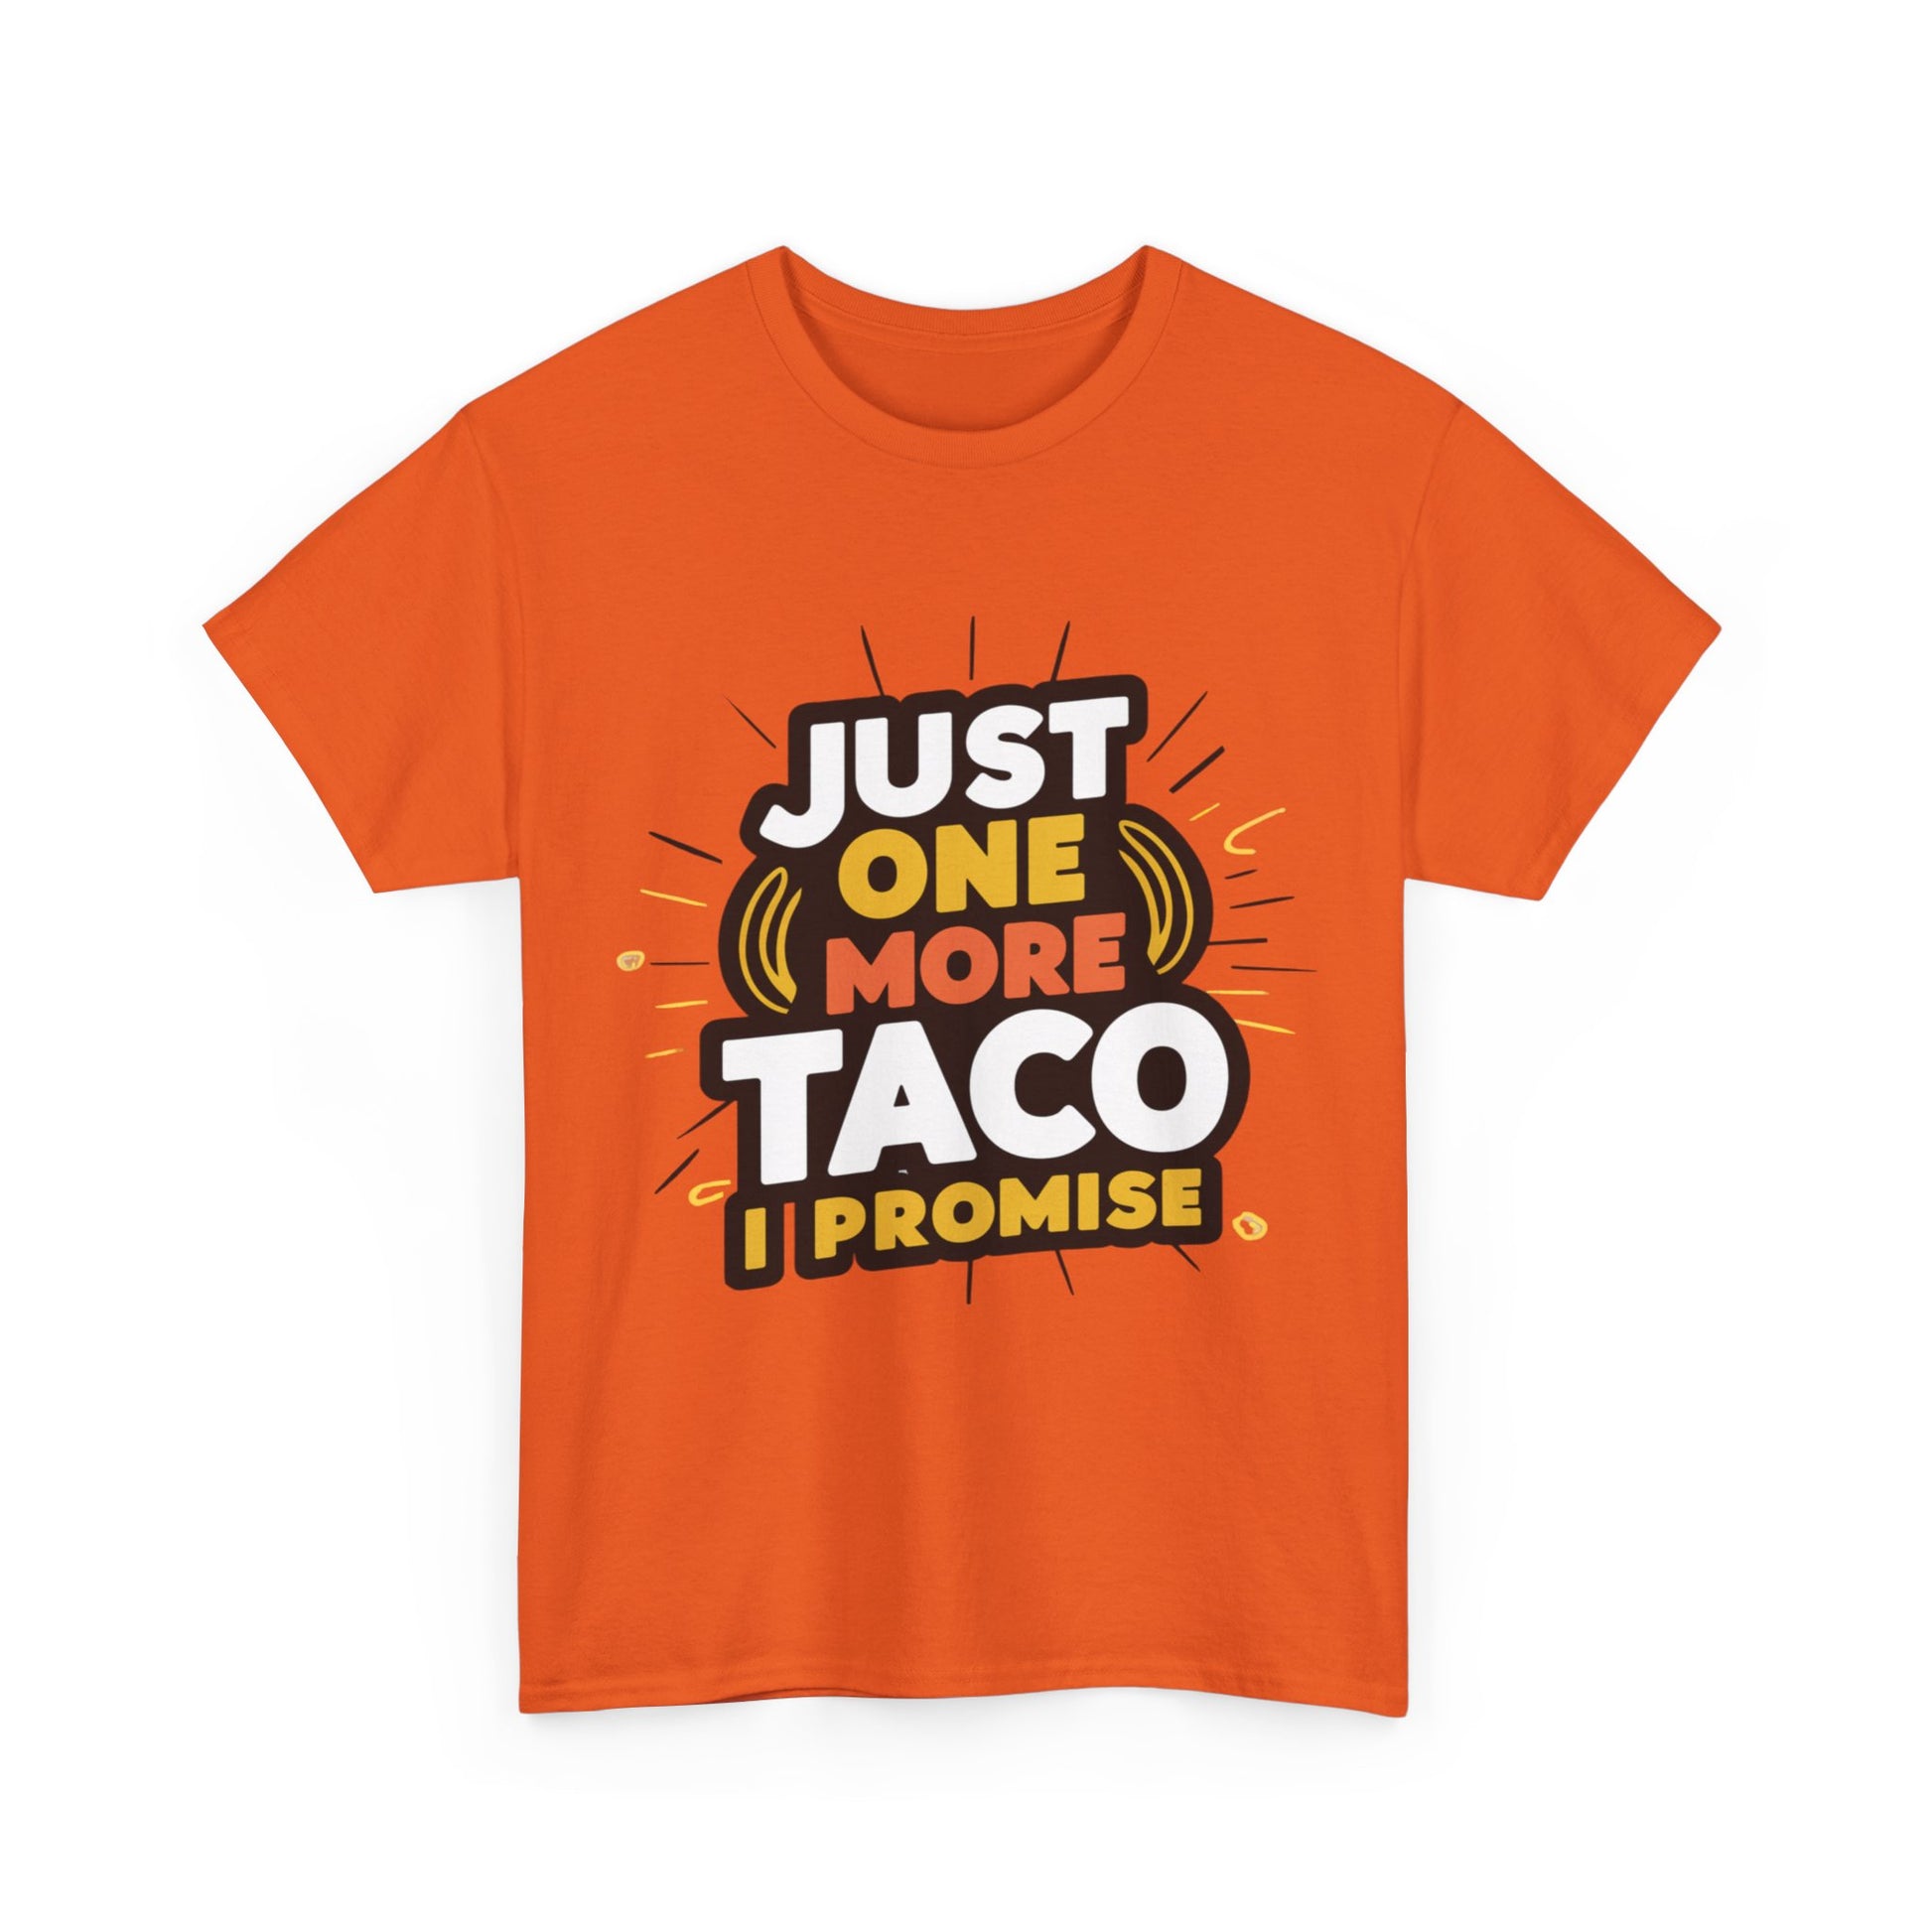 Just One More Taco I Promise Mexican Food Graphic Unisex Heavy Cotton Tee Cotton Funny Humorous Graphic Soft Premium Unisex Men Women Orange T-shirt Birthday Gift-30